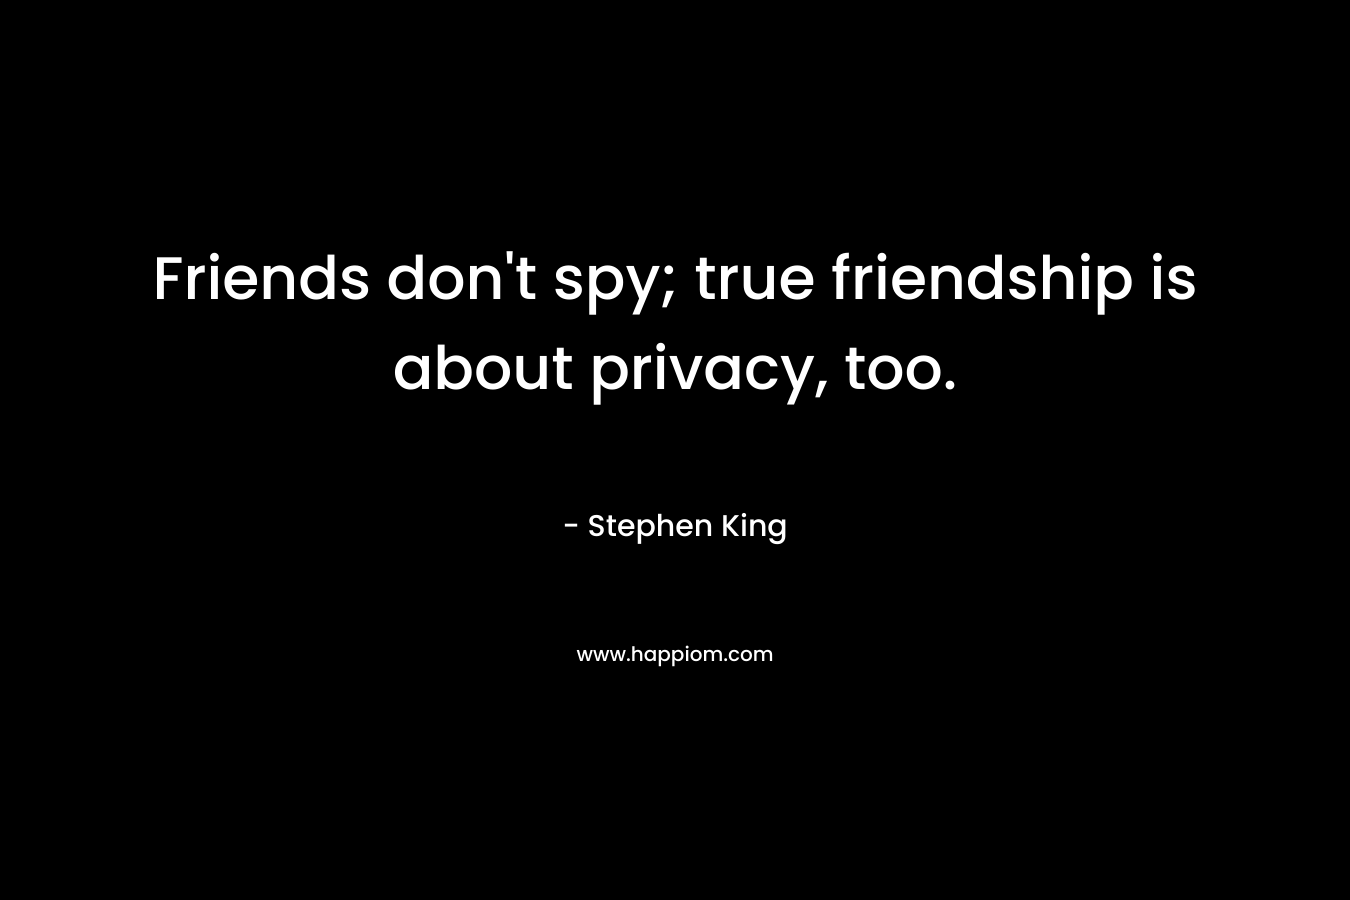 Friends don’t spy; true friendship is about privacy, too. – Stephen King